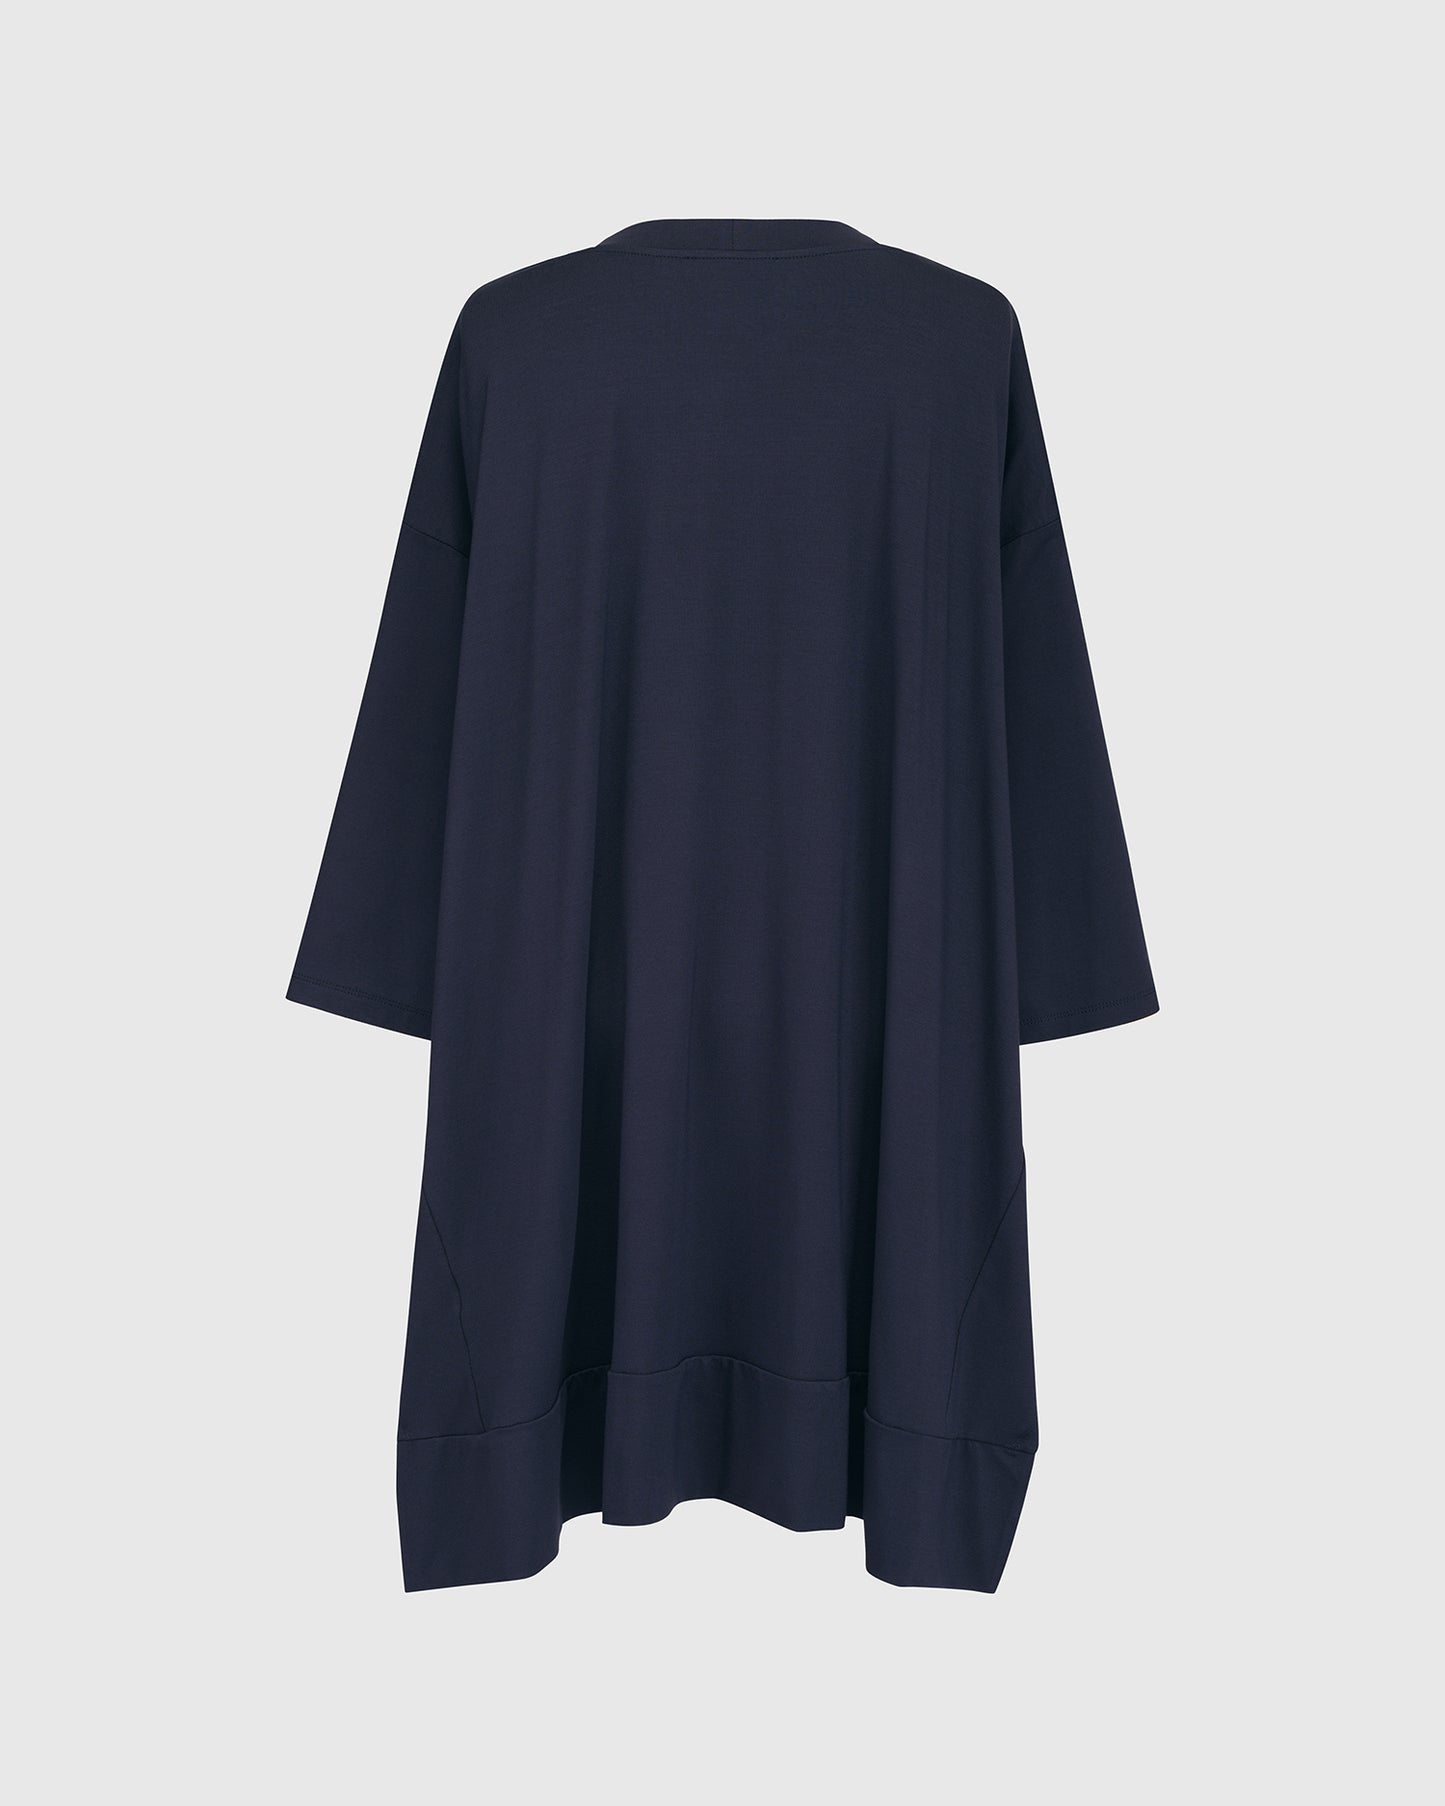 Essential Oversized Trapeze Top, Navy By Alembika